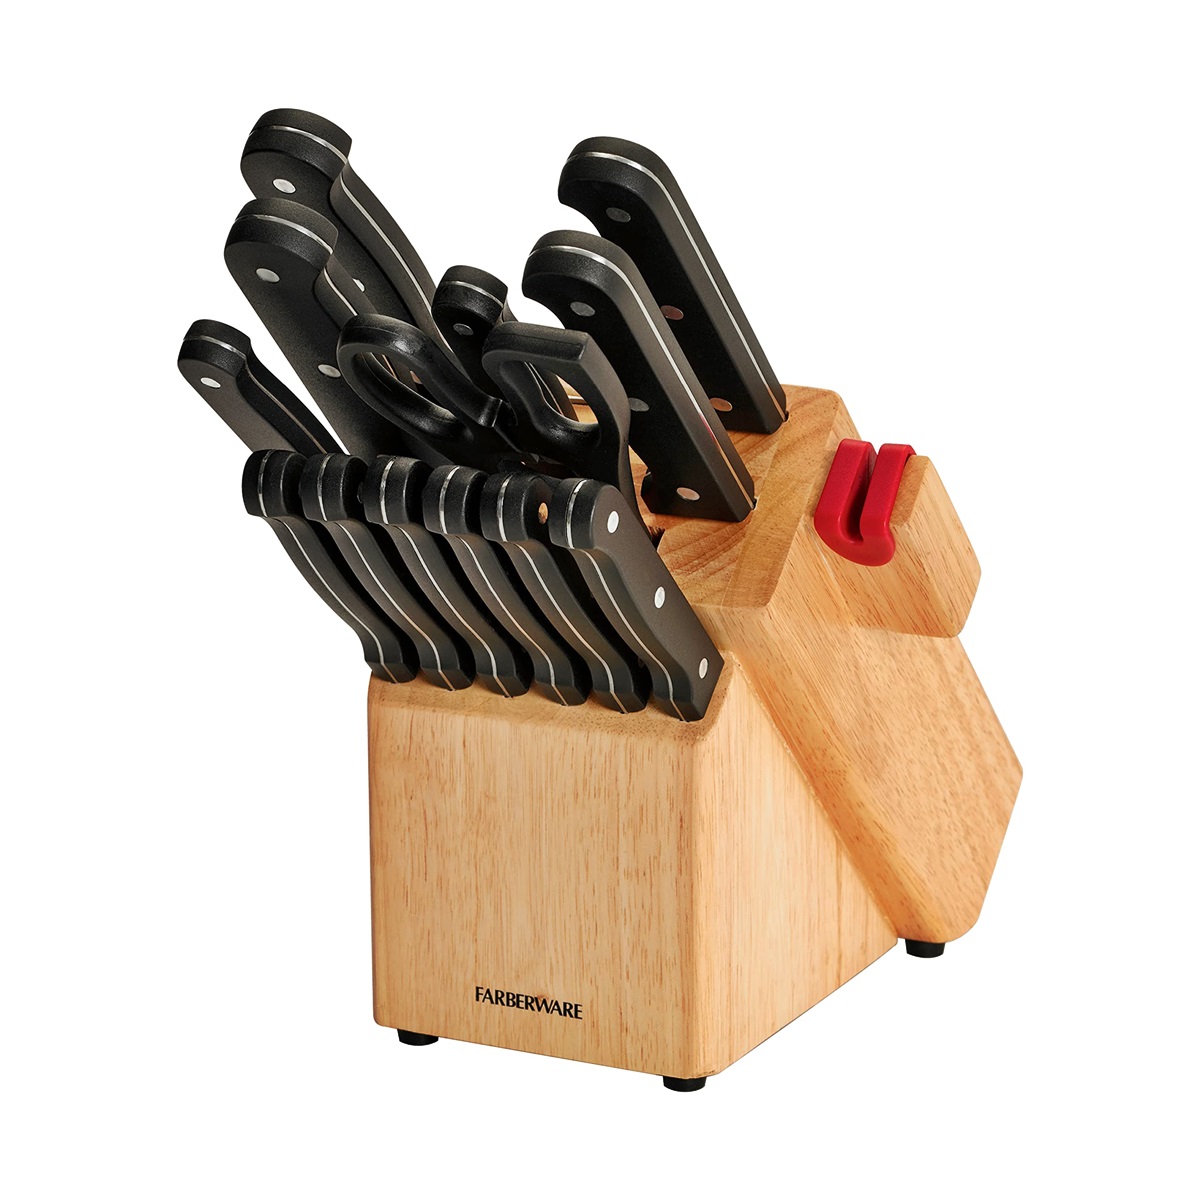 Farberware Knife Block Set With Sharpener And How To Use